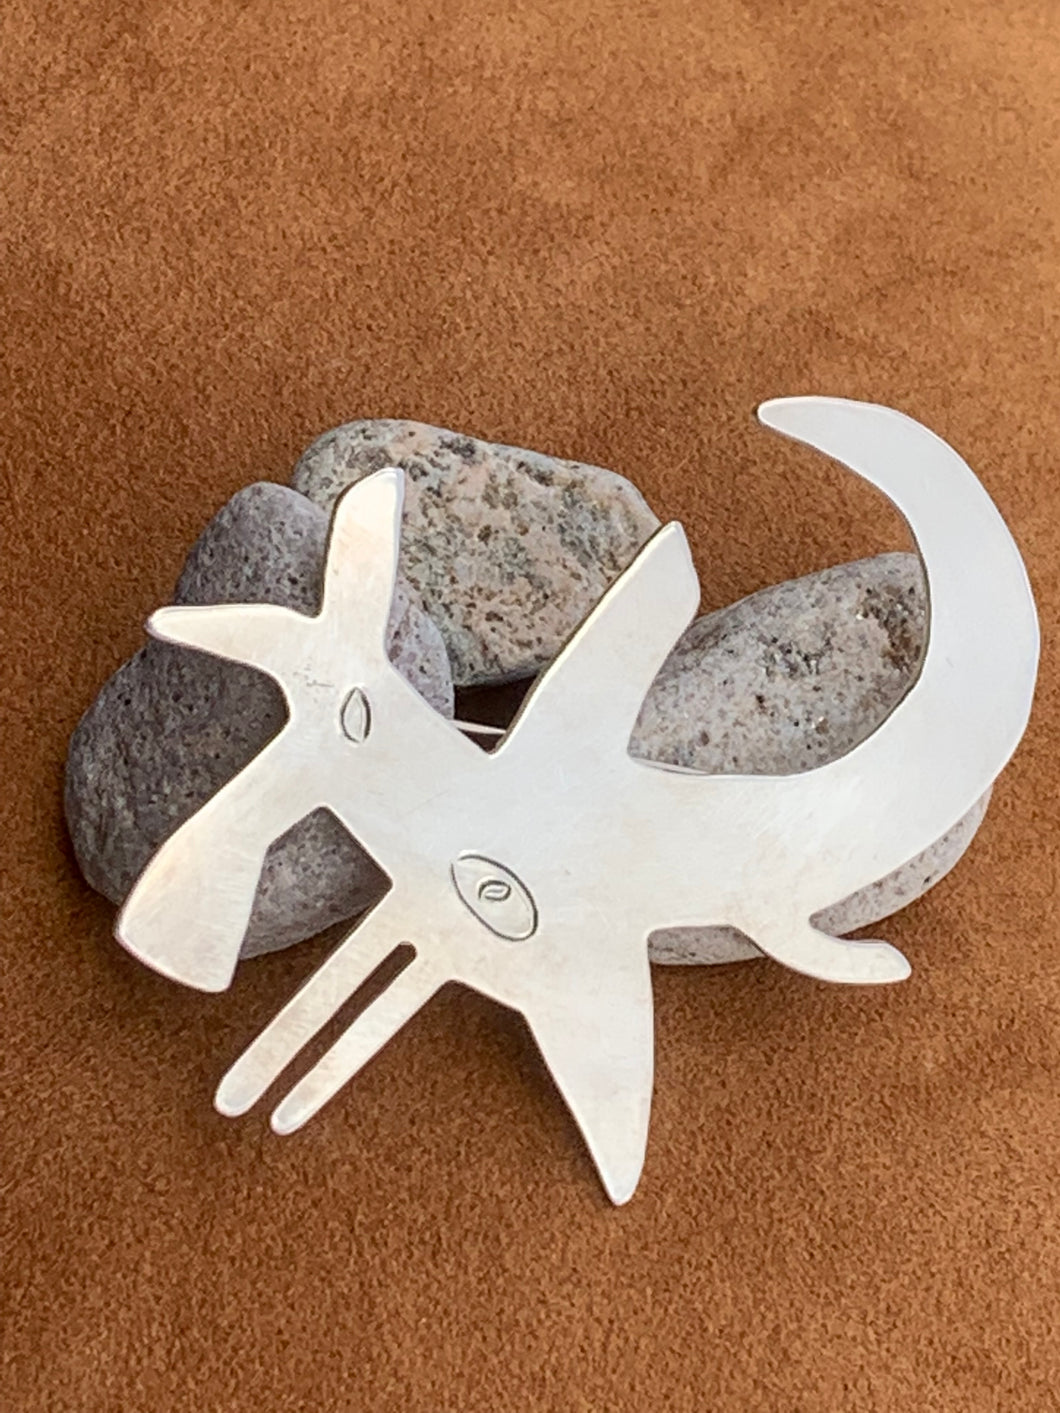 Pleiades Running Star Pin by David Anderson of Taos